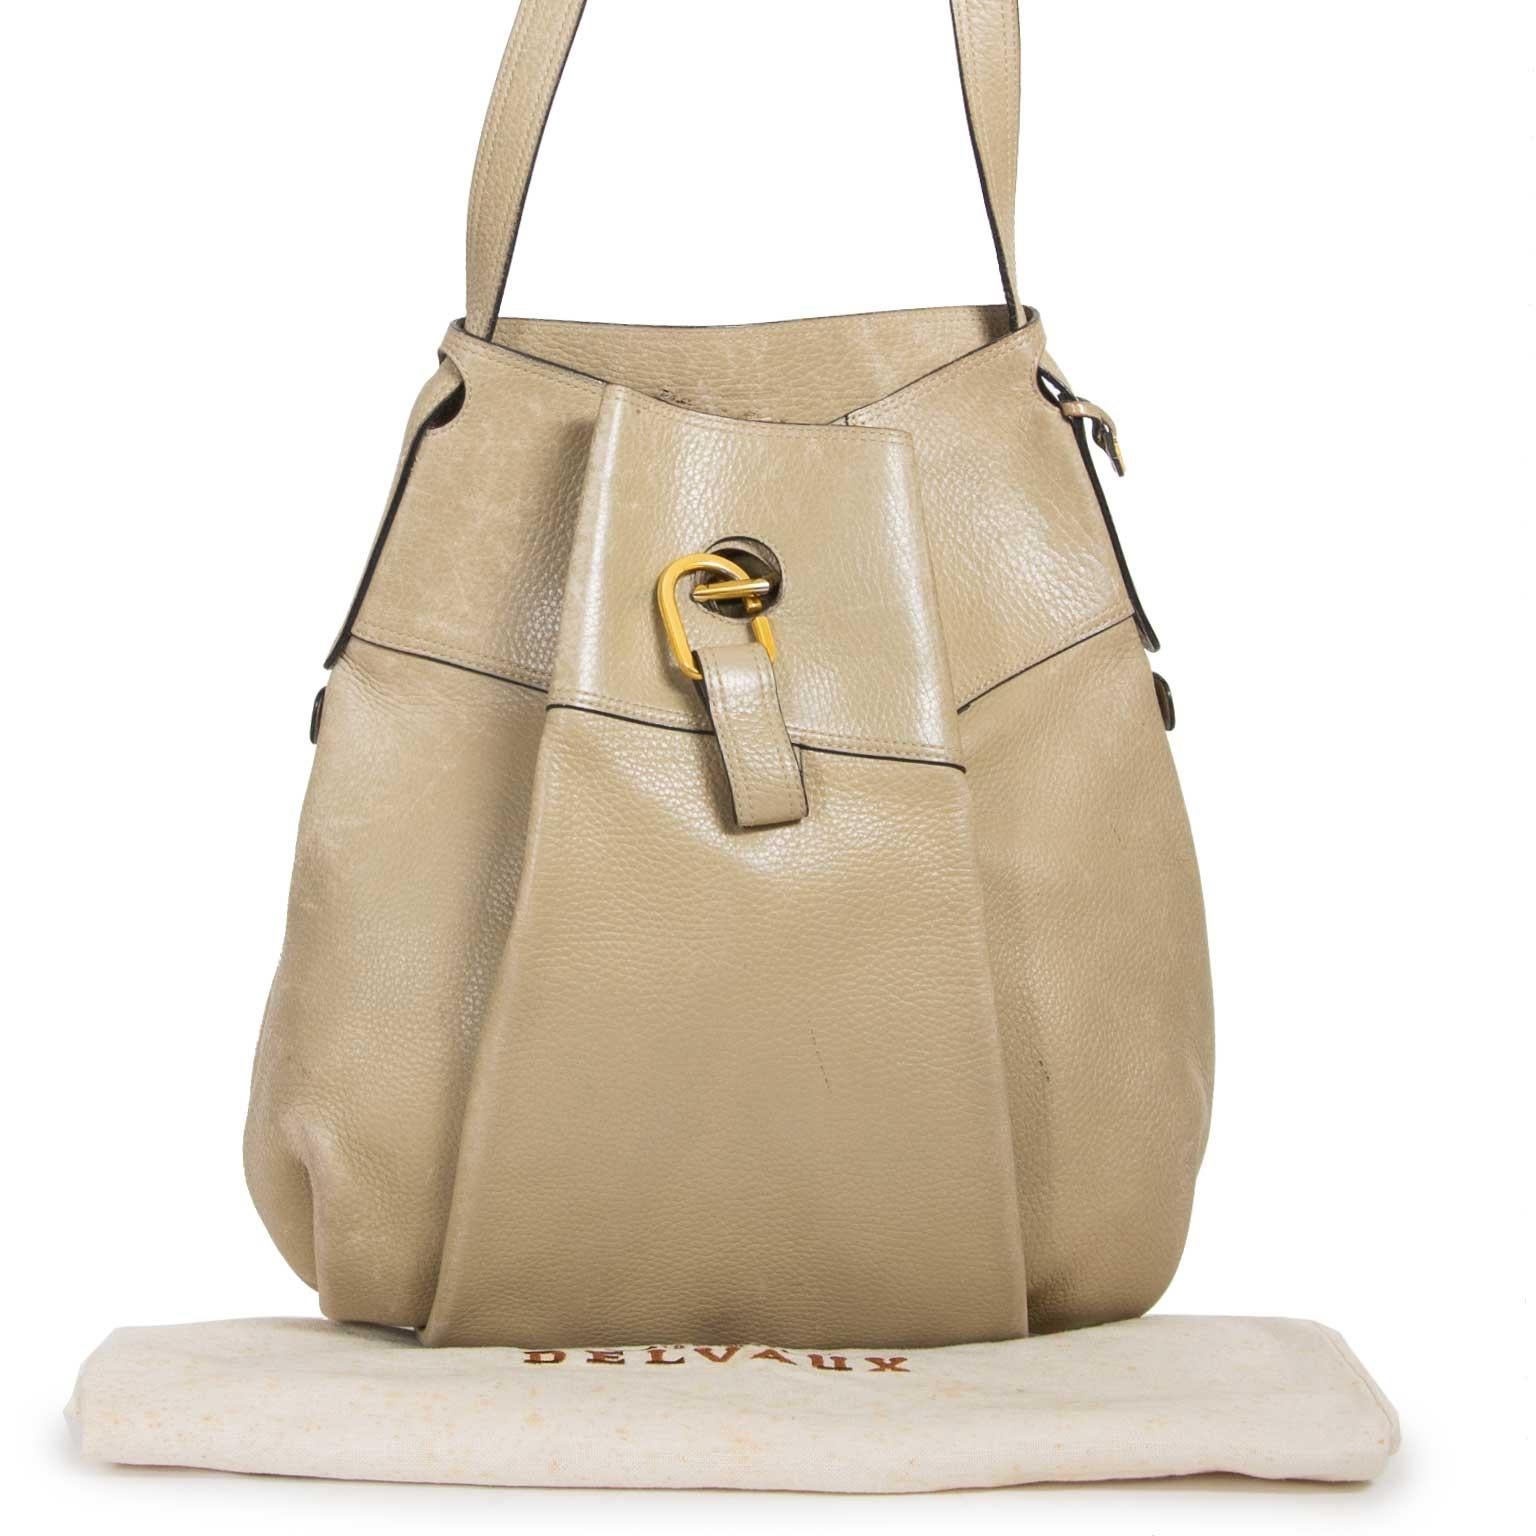 Good preloved condition

Delvaux Beige Faust Bag

The Faust bag is a classic style by Delvaux, perfect to suit any occasion.
This Faust bag is crafted in beige leather and features gold-toned details. The bag opens with a zipper in the back.

Comes